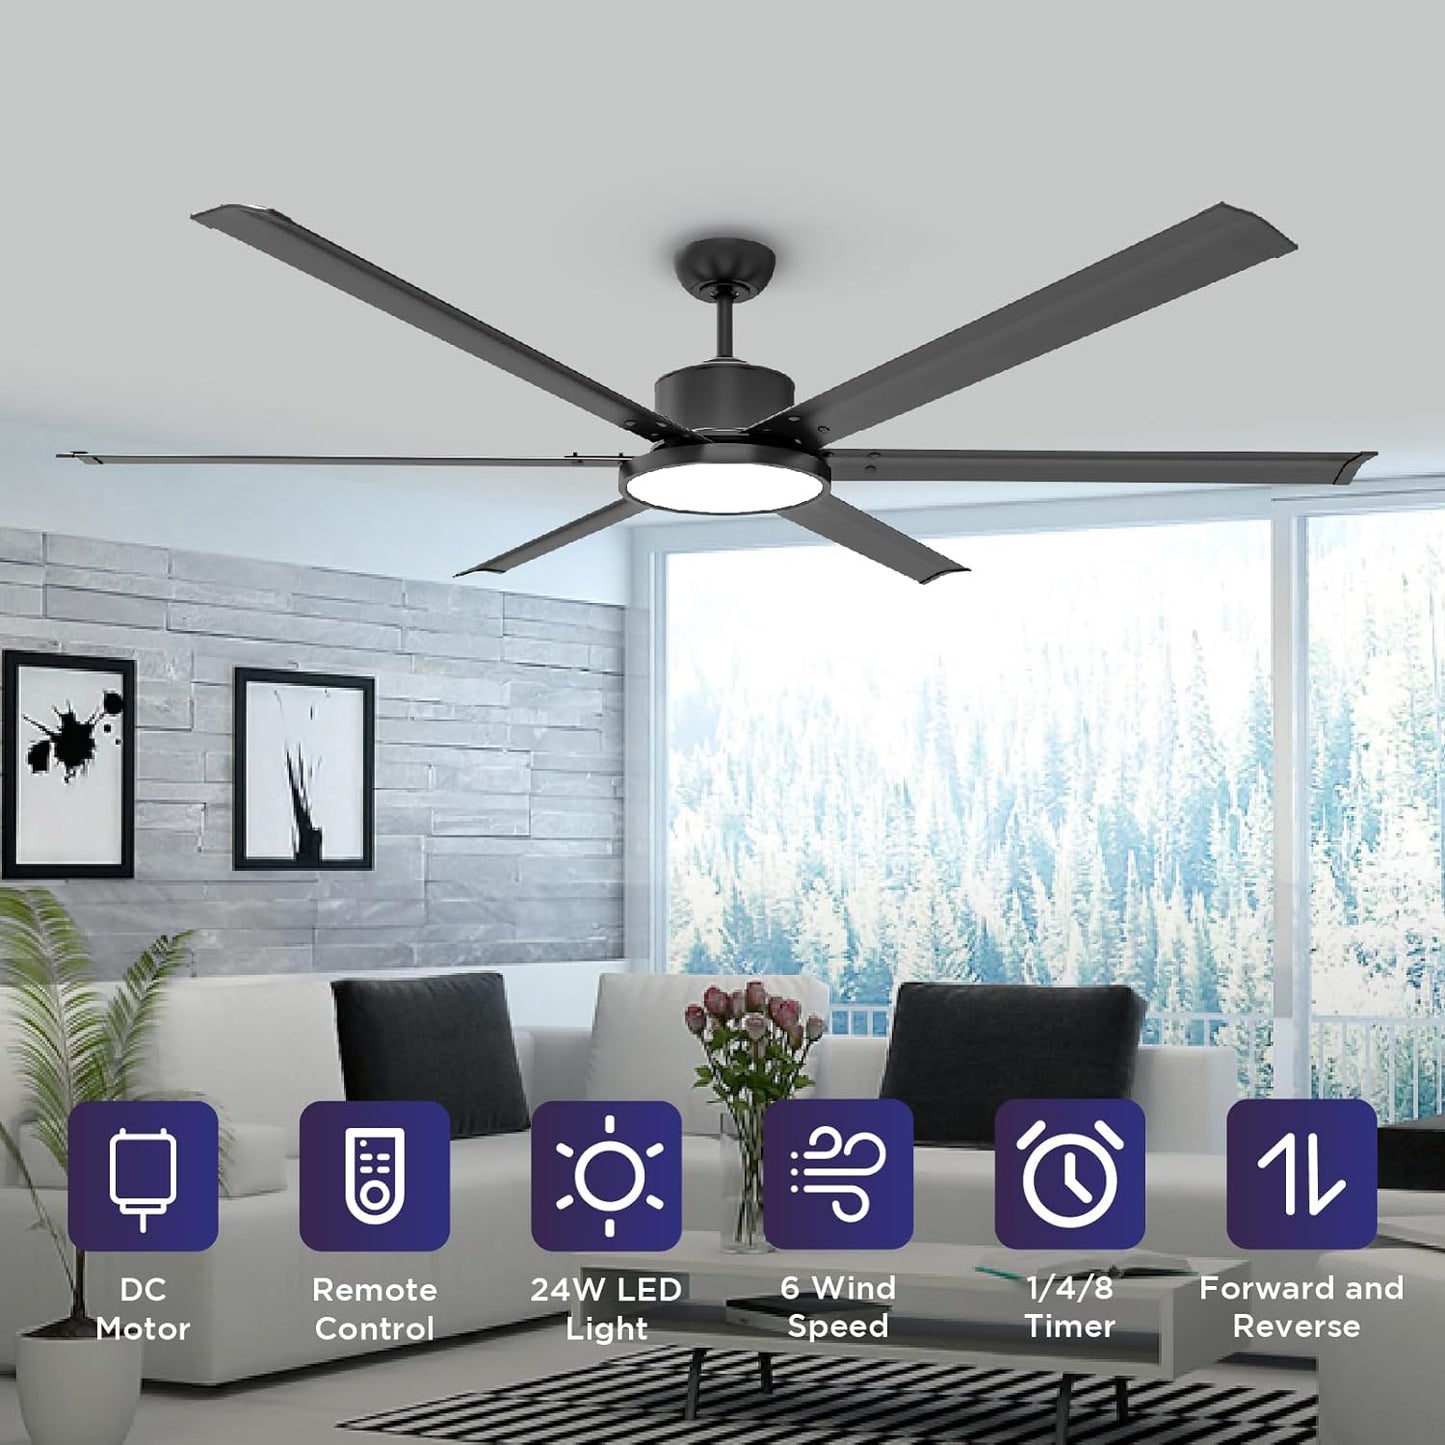 ocioc 72inch Ceiling Fans with Lights and Remote, Industrial DC Motor Metal Ceiling Fan for Living Room, Family Room, Farmhouse, Garage Indoor Covered Ourdoor Black